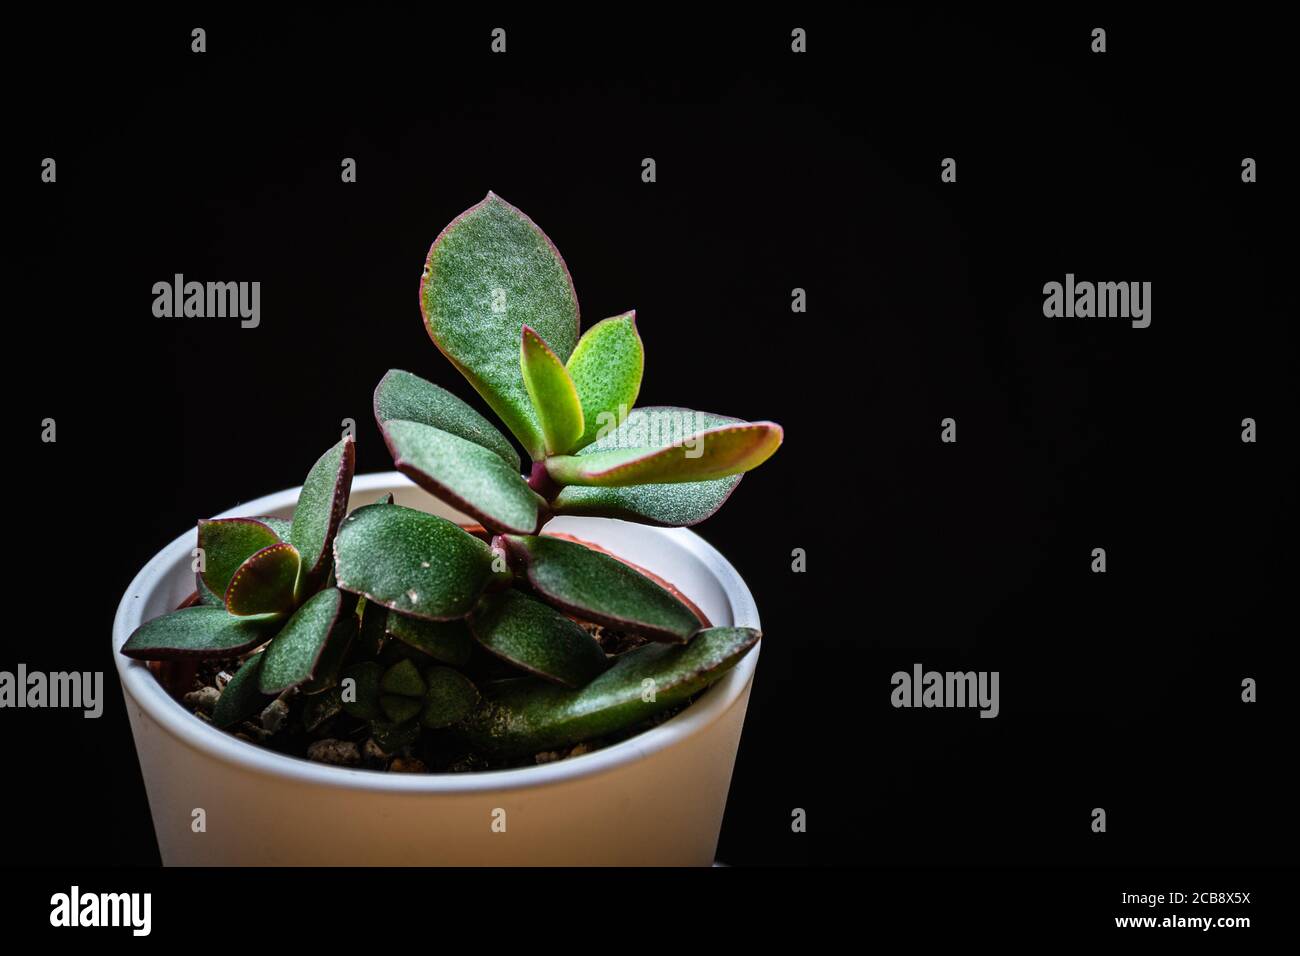 Close-up on a small jade plant (crassula ovata) succulent plantlet on a black background. Exotic trendy houseplant detail against black backdrop. Stock Photo